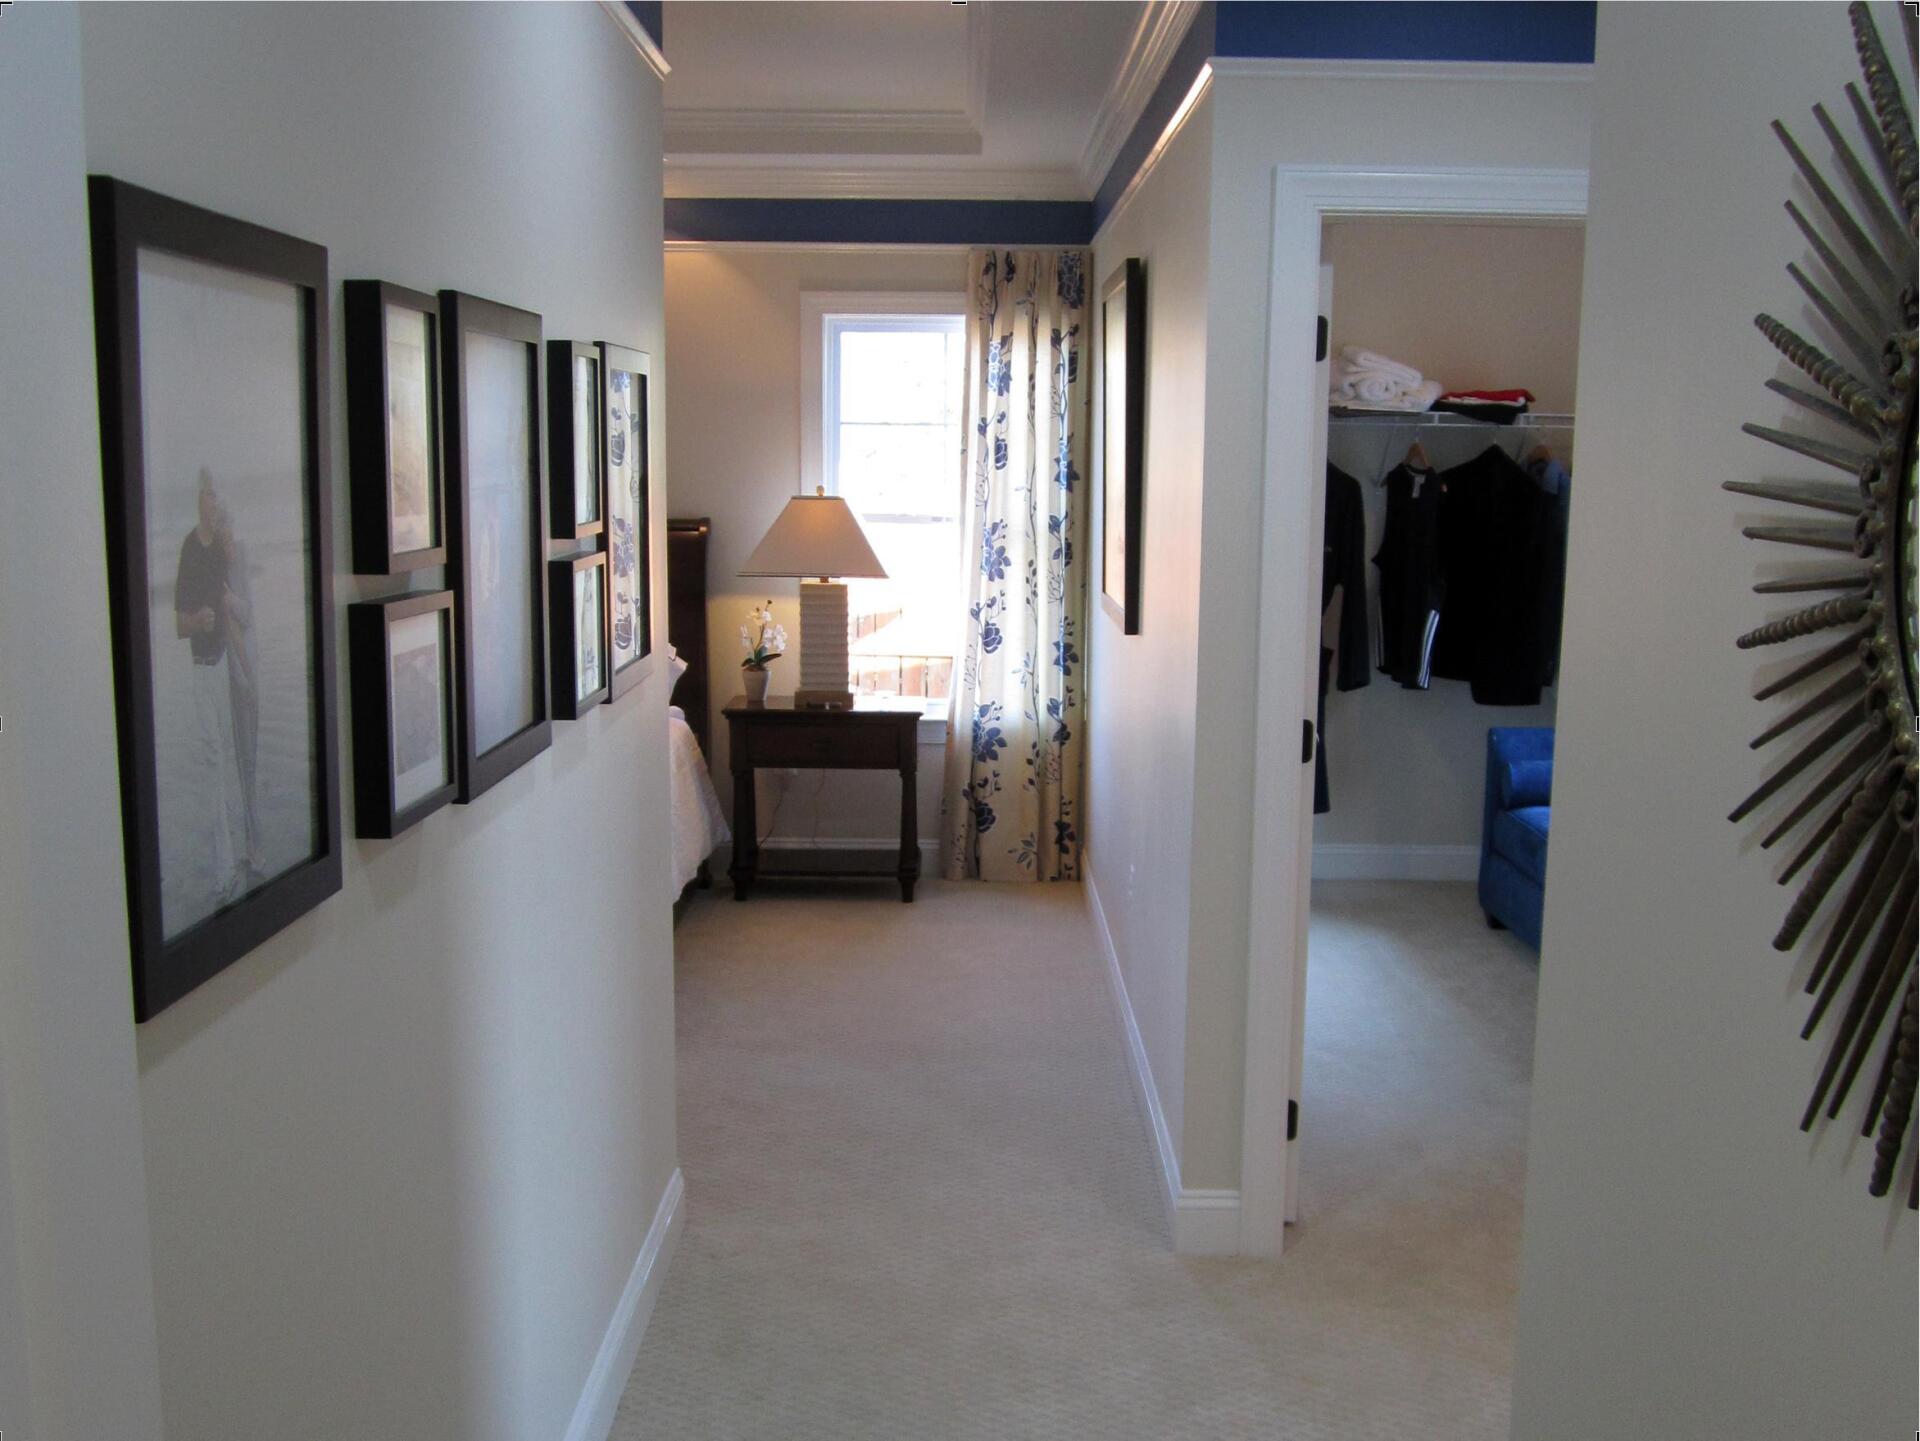 Hallway | Kitty Hawk Legacy | Covell Communities | Chester, Maryland 21619